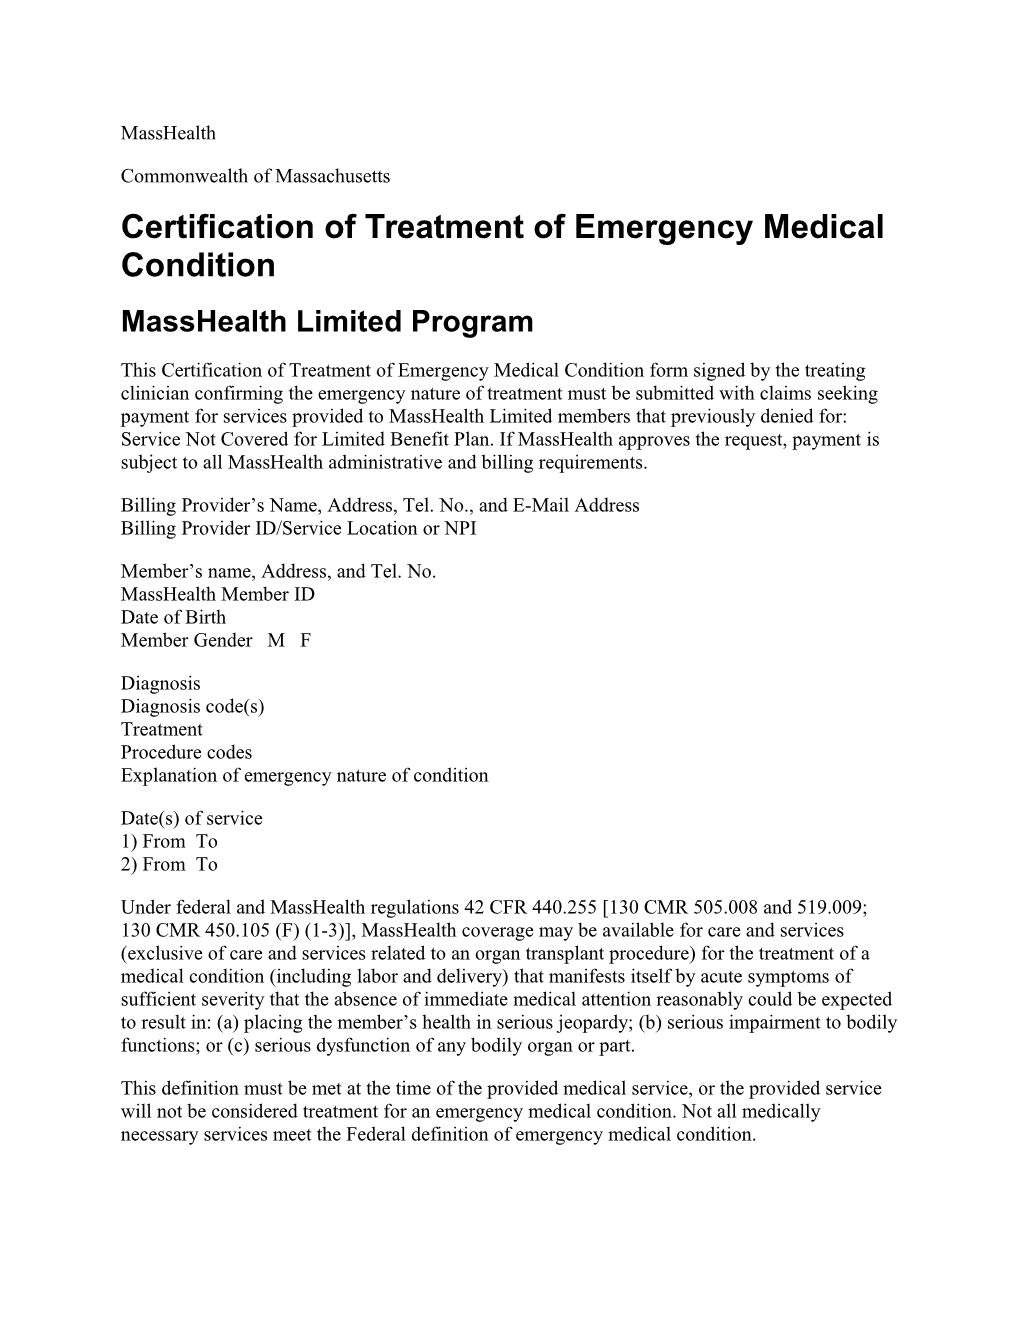 Certification of Treatment of Emergency Medical Condition